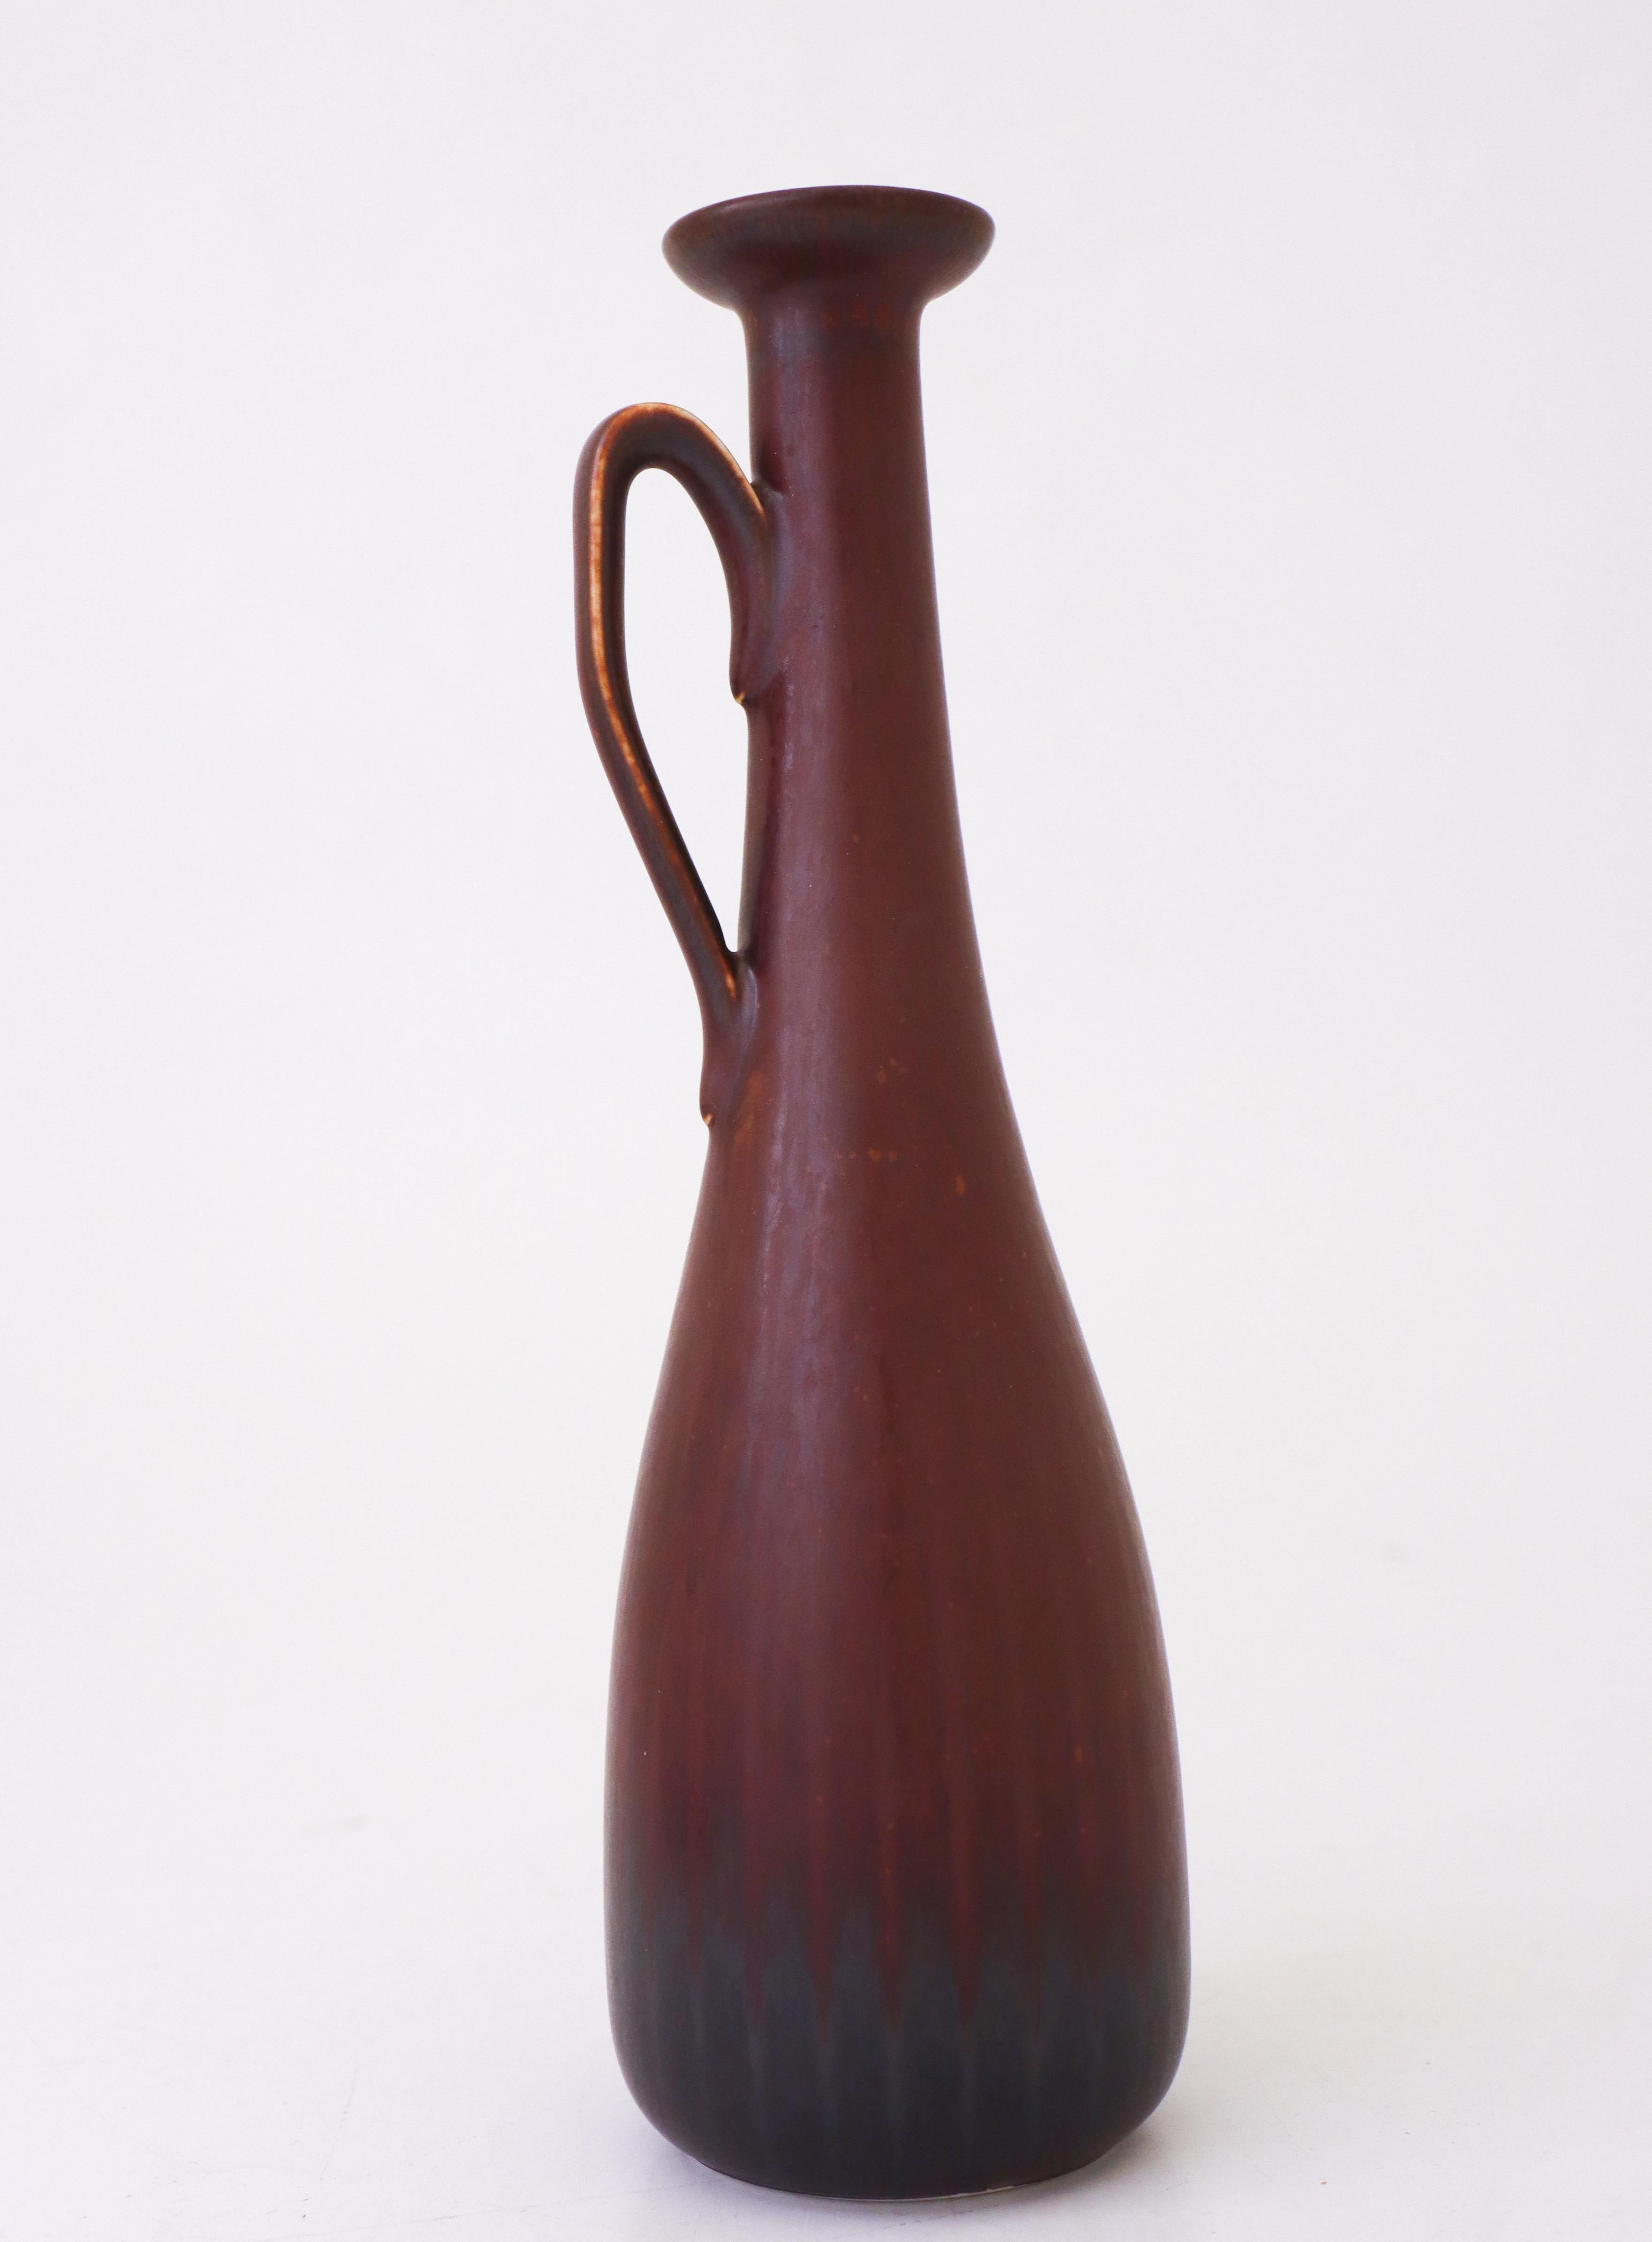 A brown vase designed by Gunnar Nylund at Rörstrand, the vase is 25 cm (10